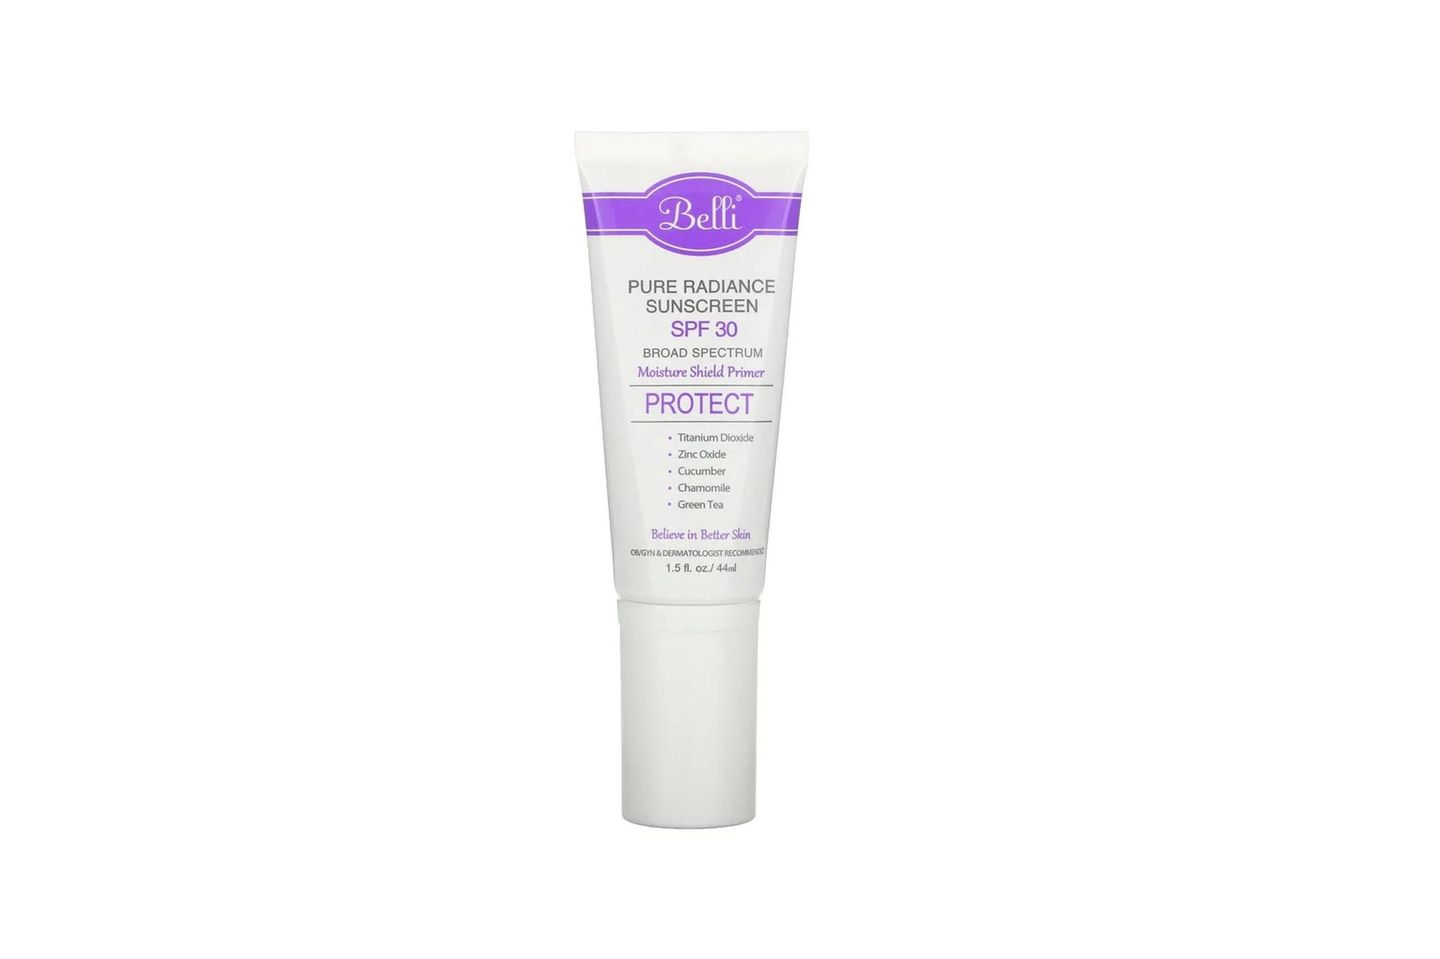 Sonnencreme Gesicht: Belli Skincare Pure Radiance Sunscreen LSF 30